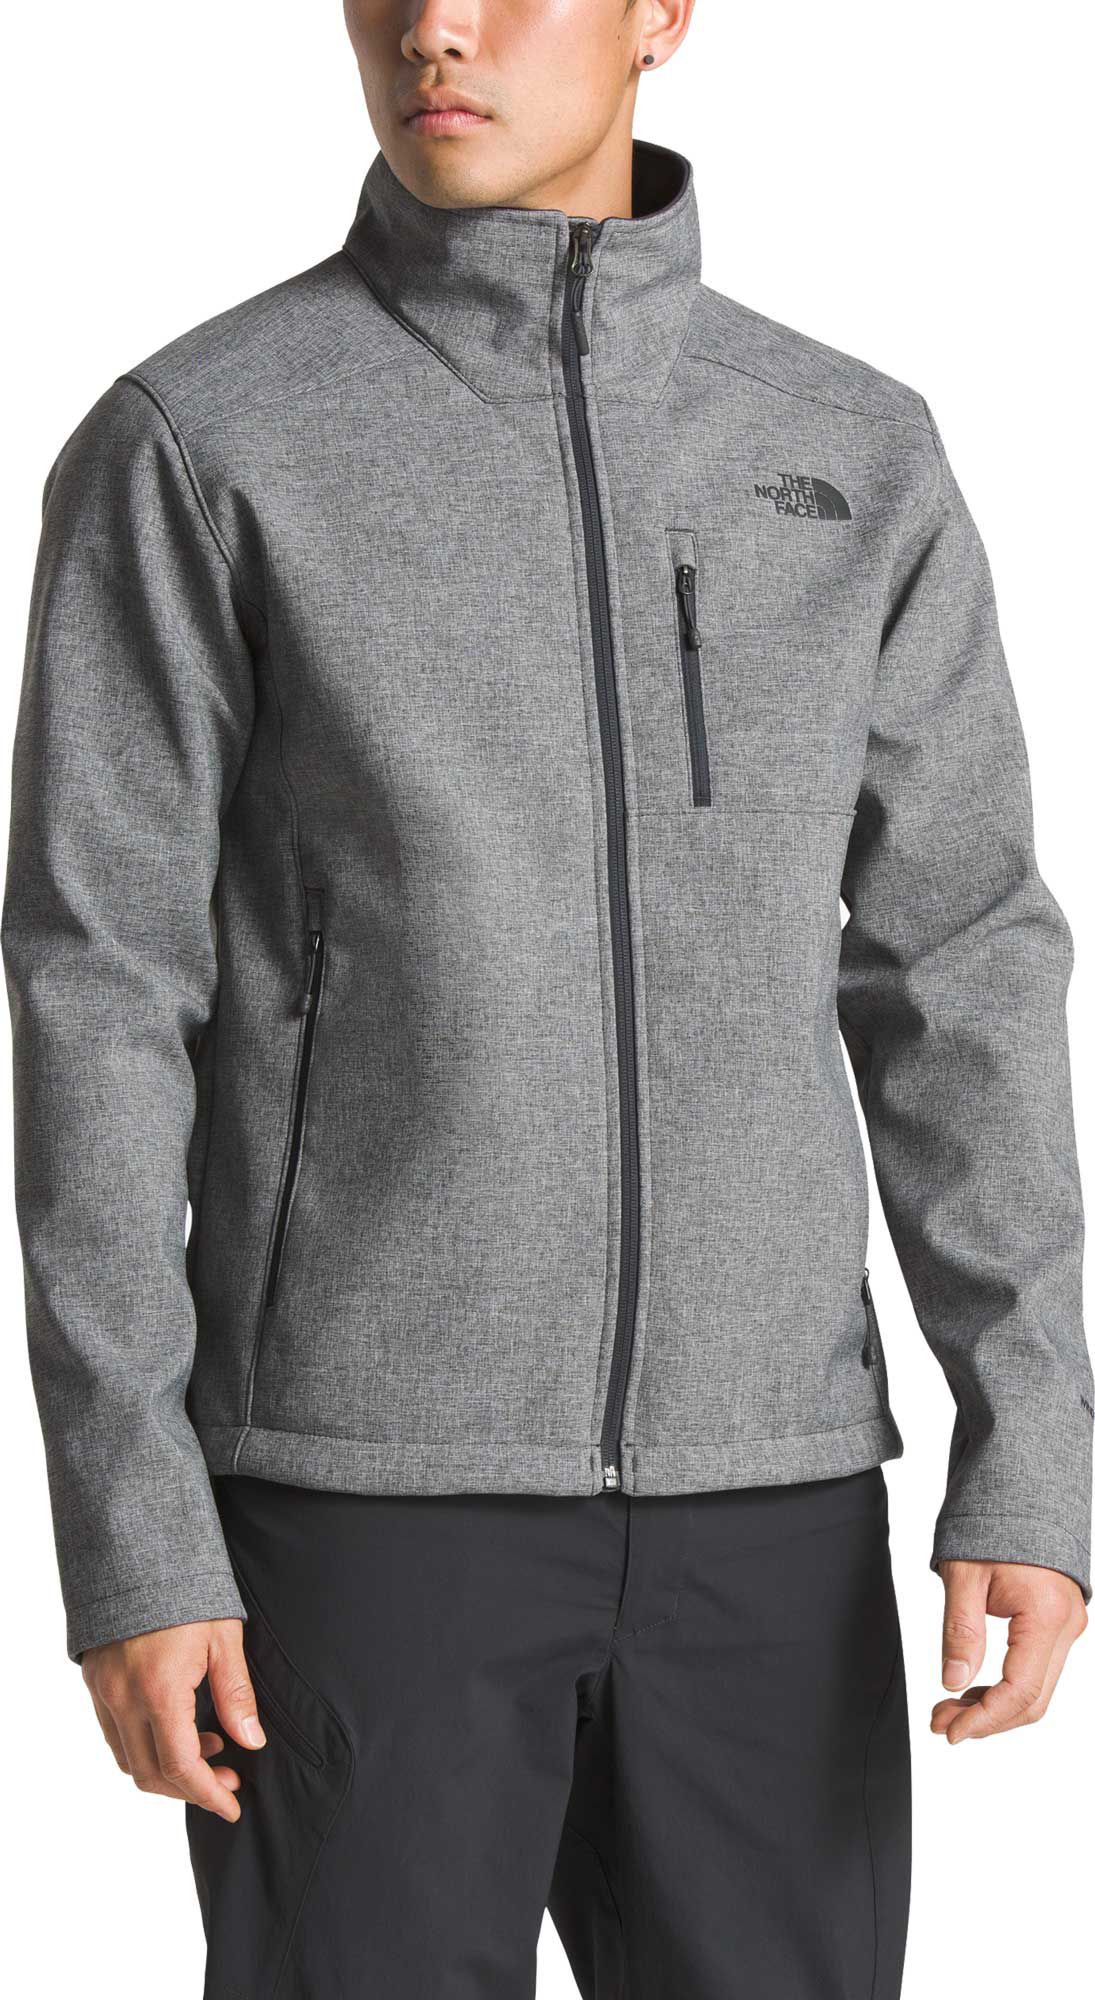 north face men's apex bionic 2 soft shell jacket